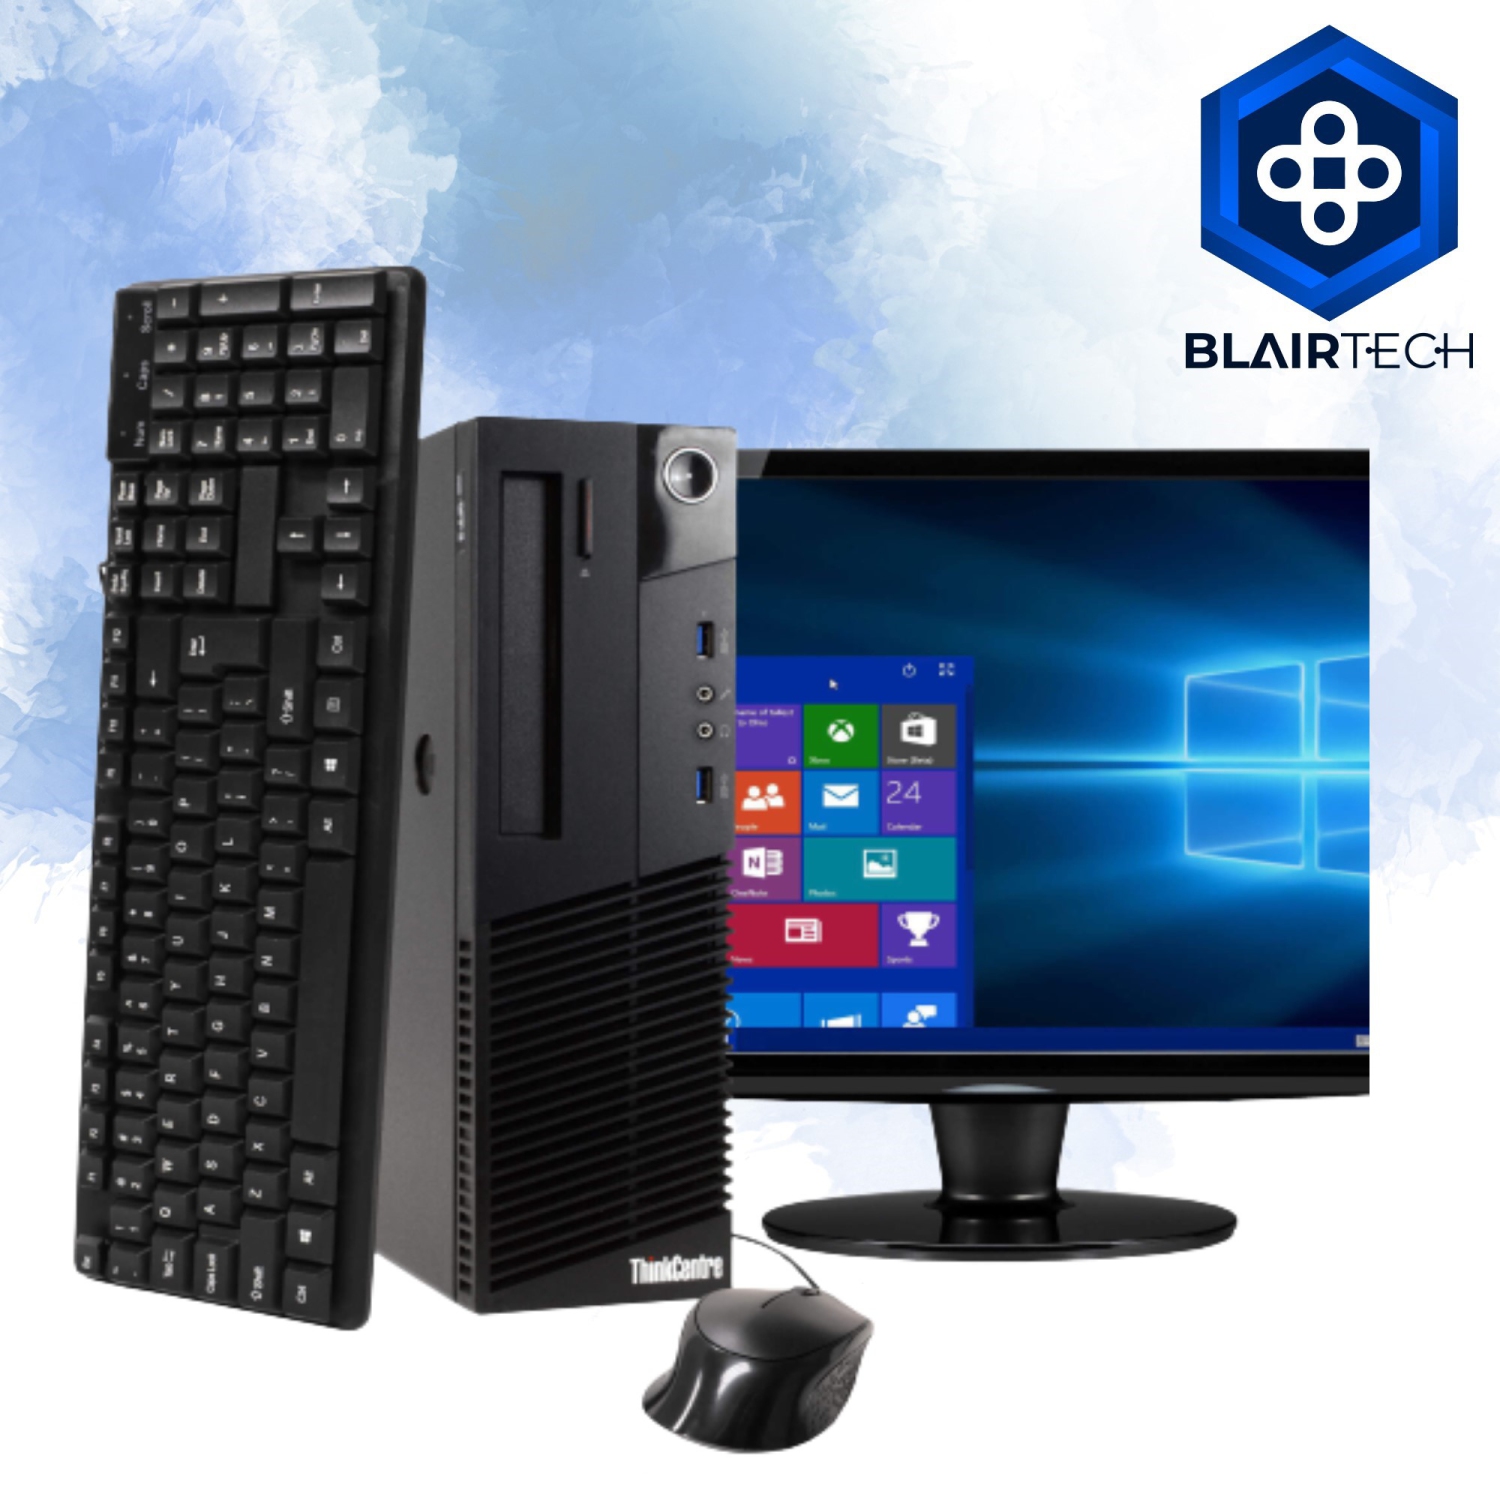 Refurbished (Good) - Lenovo ThinkCentre M93 Desktop Computer with Windows 10 Pro and LCD for Office 22in Monitor